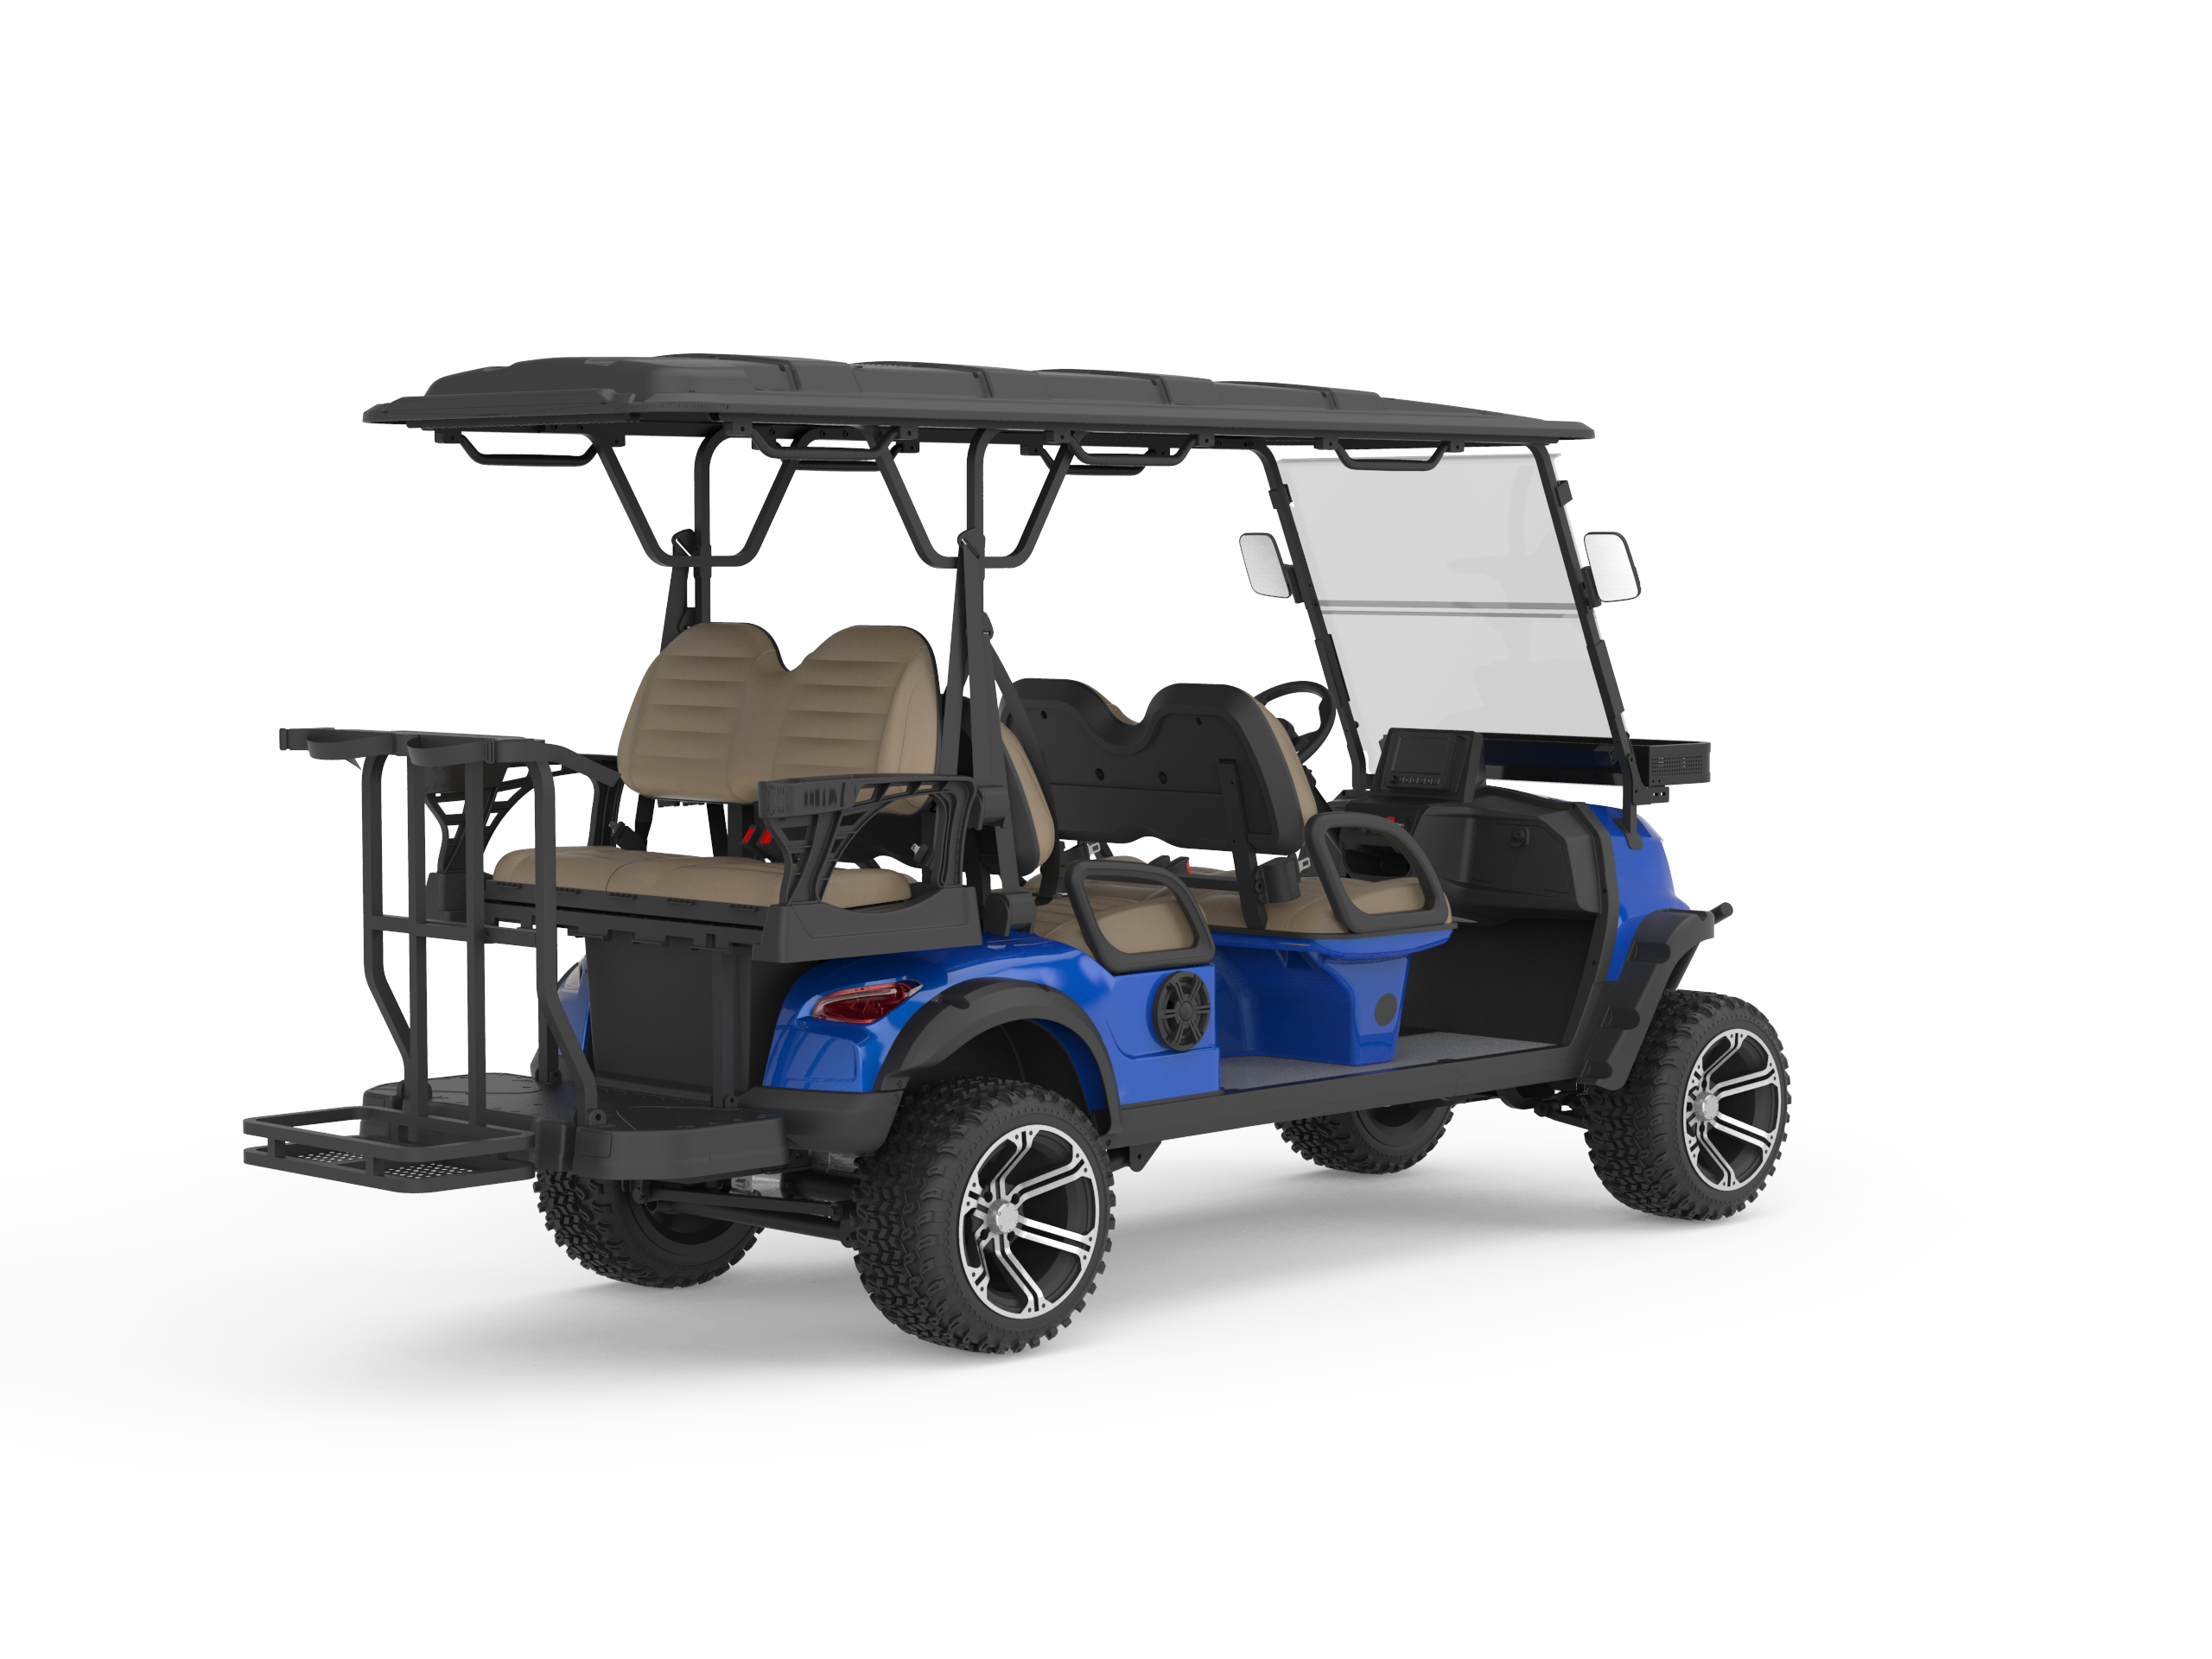 Lithium&acid battery 5000W electric off-road vehicle adult all-terrain 6 seats L4+2+GBR golf cart with golf bag stand-Borcart Golf Cart